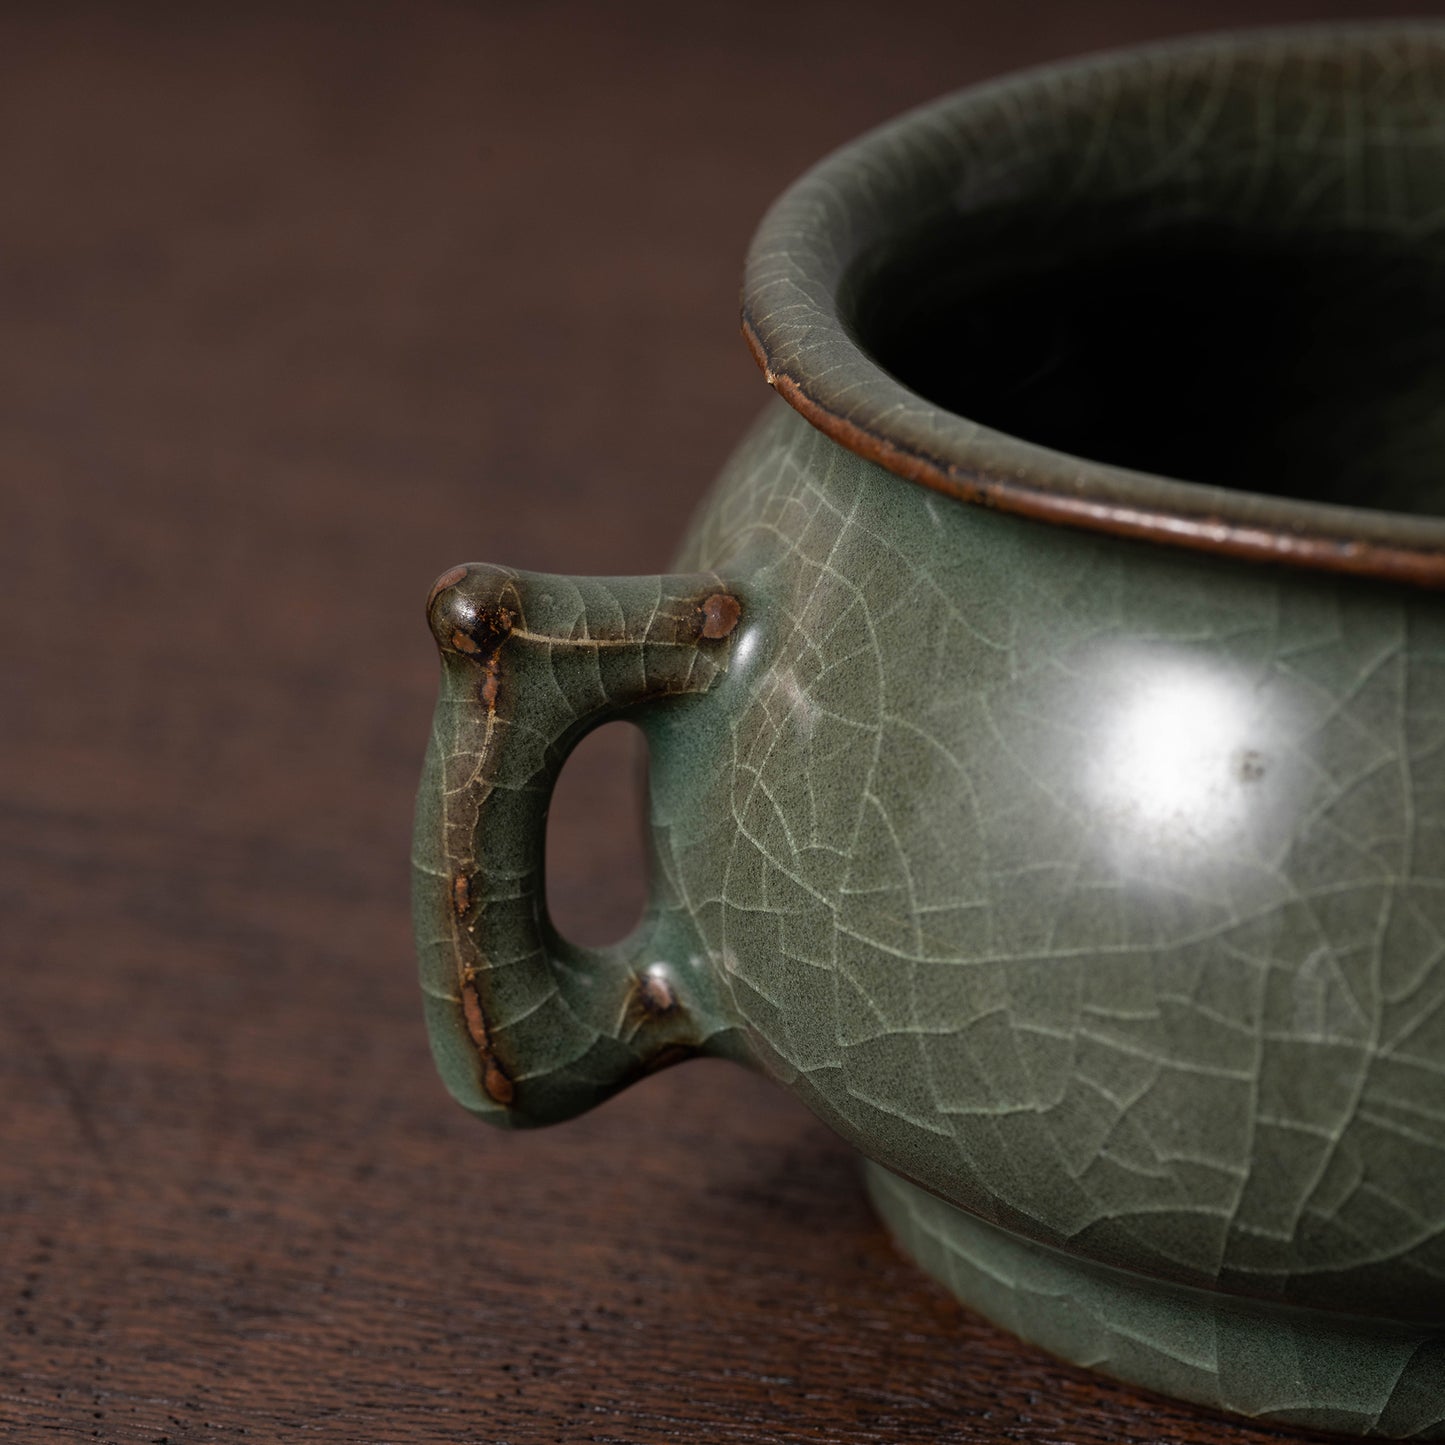 Southern Song Dynasty Guan ware Celadon Censer